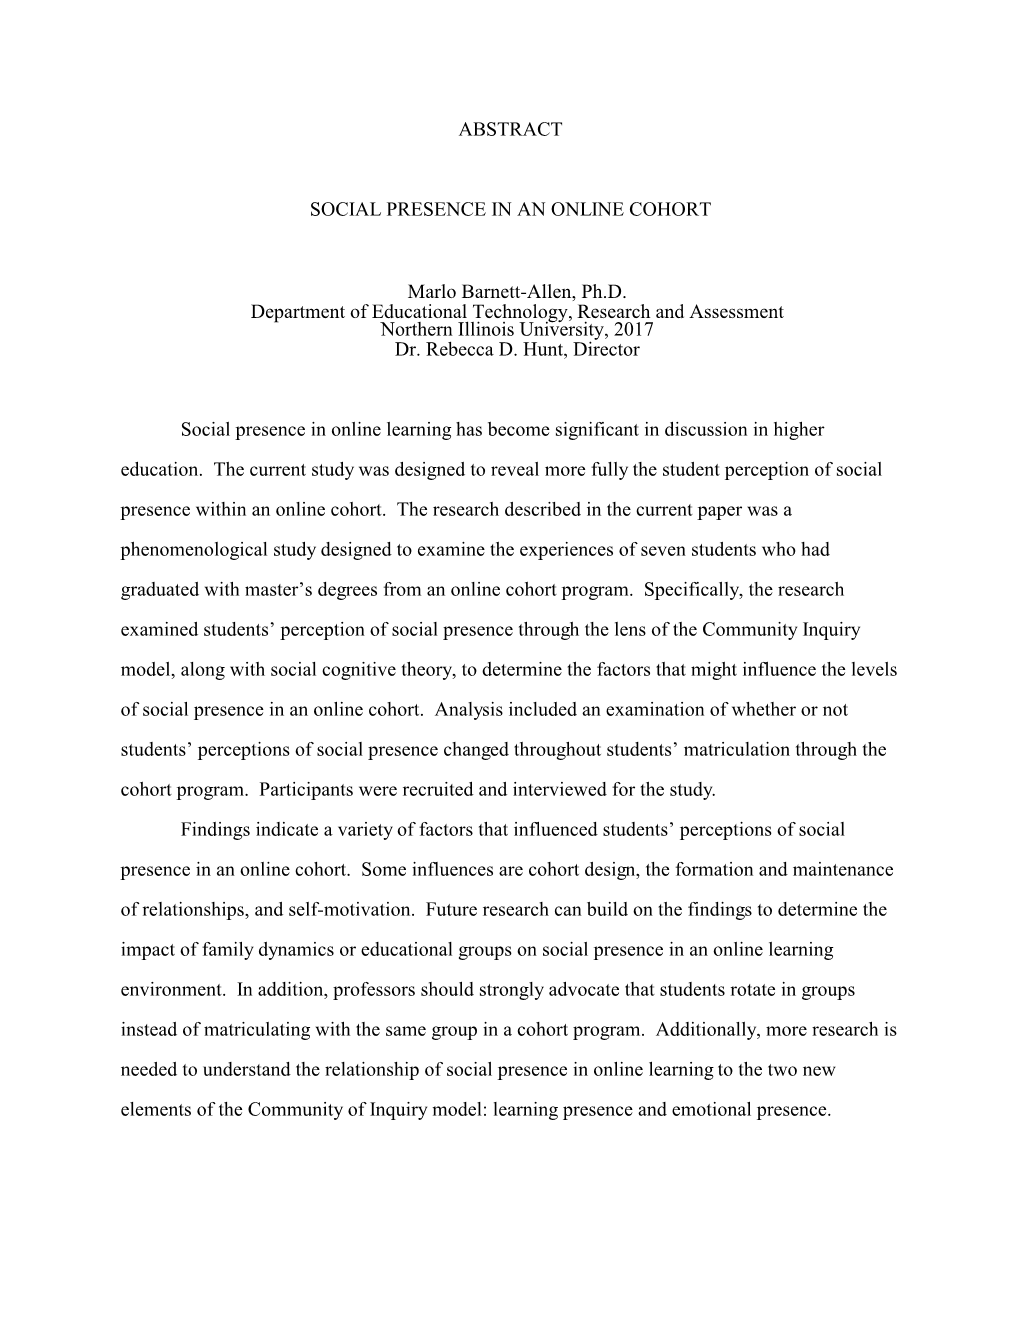 ABSTRACT SOCIAL PRESENCE in an ONLINE COHORT Marlo